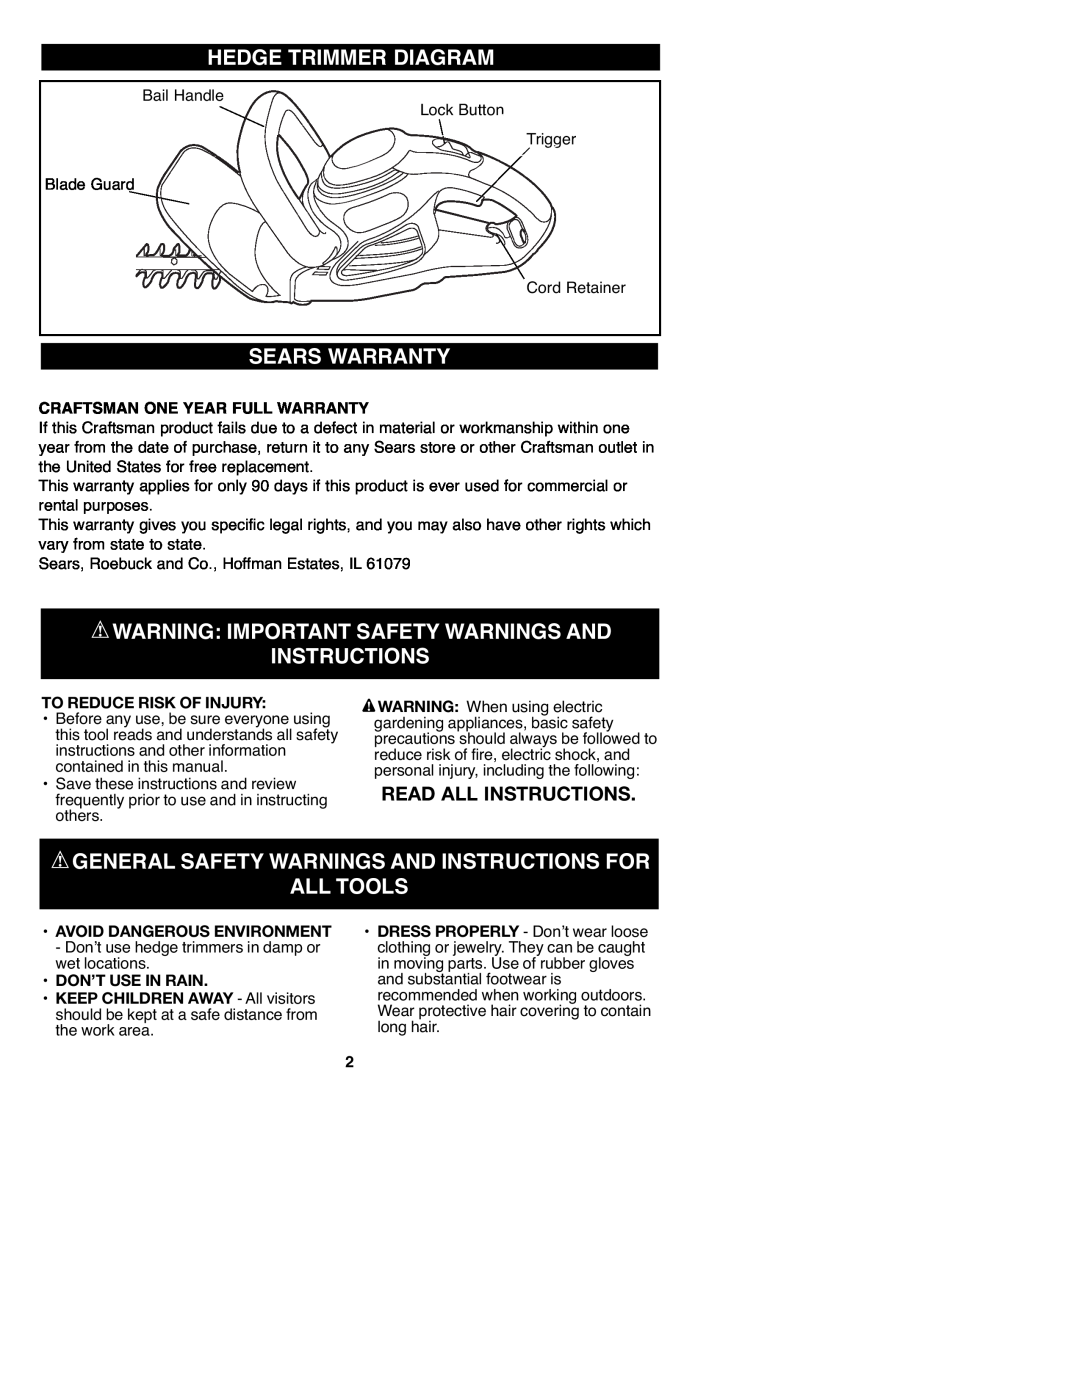 Sears C935.51891 Hedge Trimmer Diagram, Sears Warranty, Warning Important Safety Warnings And, Instructions, All Tools 